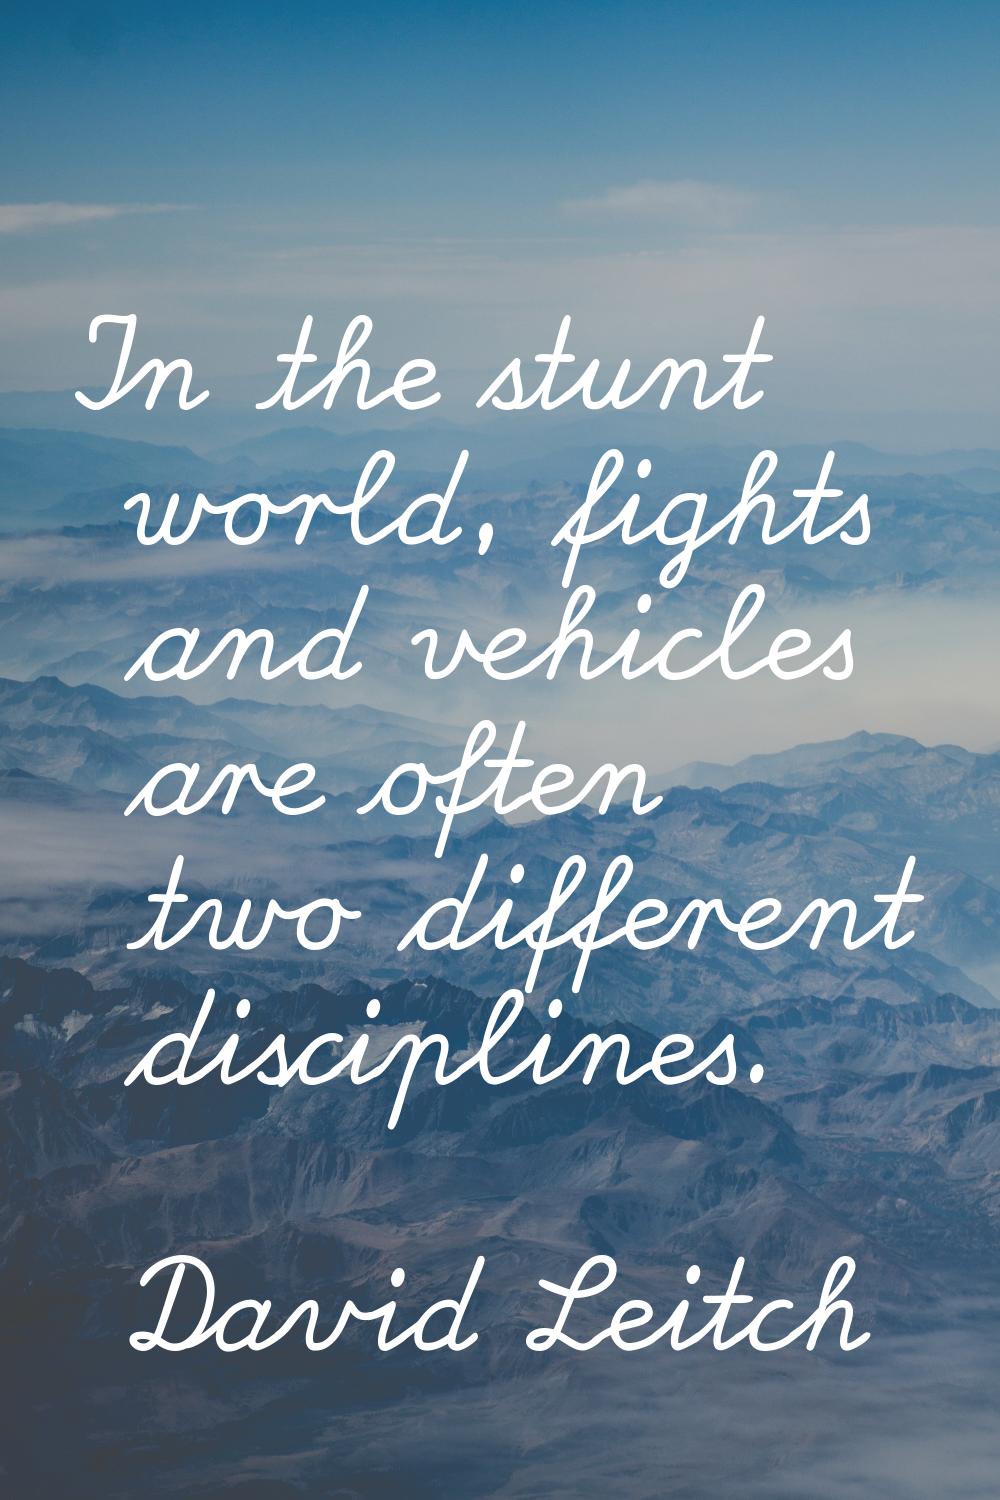 In the stunt world, fights and vehicles are often two different disciplines.